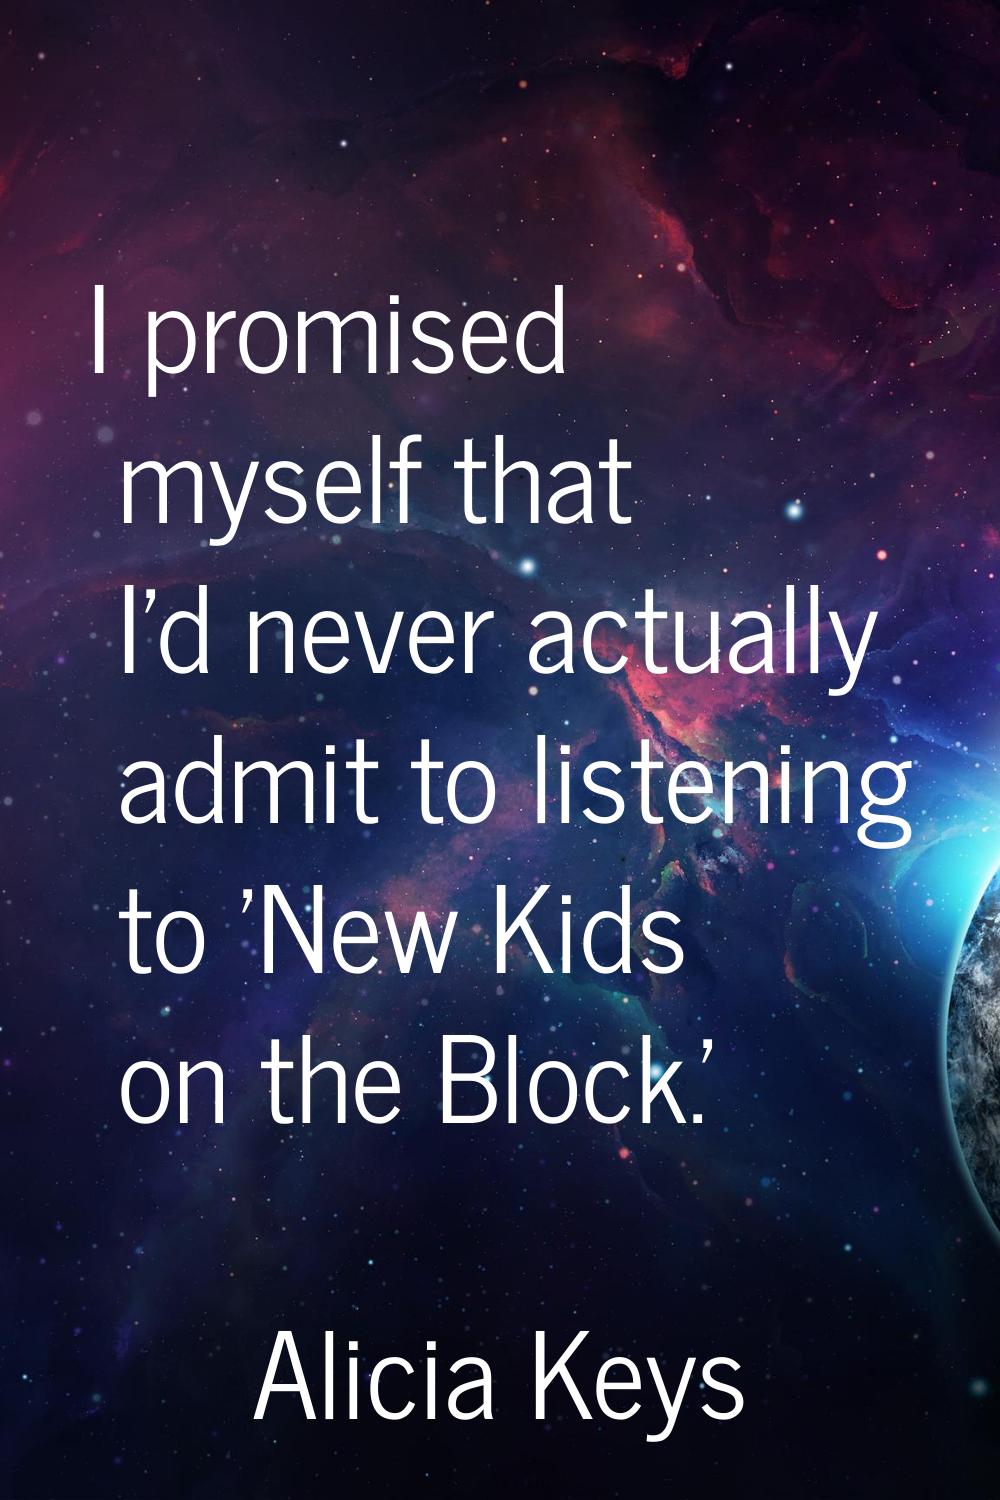 I promised myself that I'd never actually admit to listening to 'New Kids on the Block.'